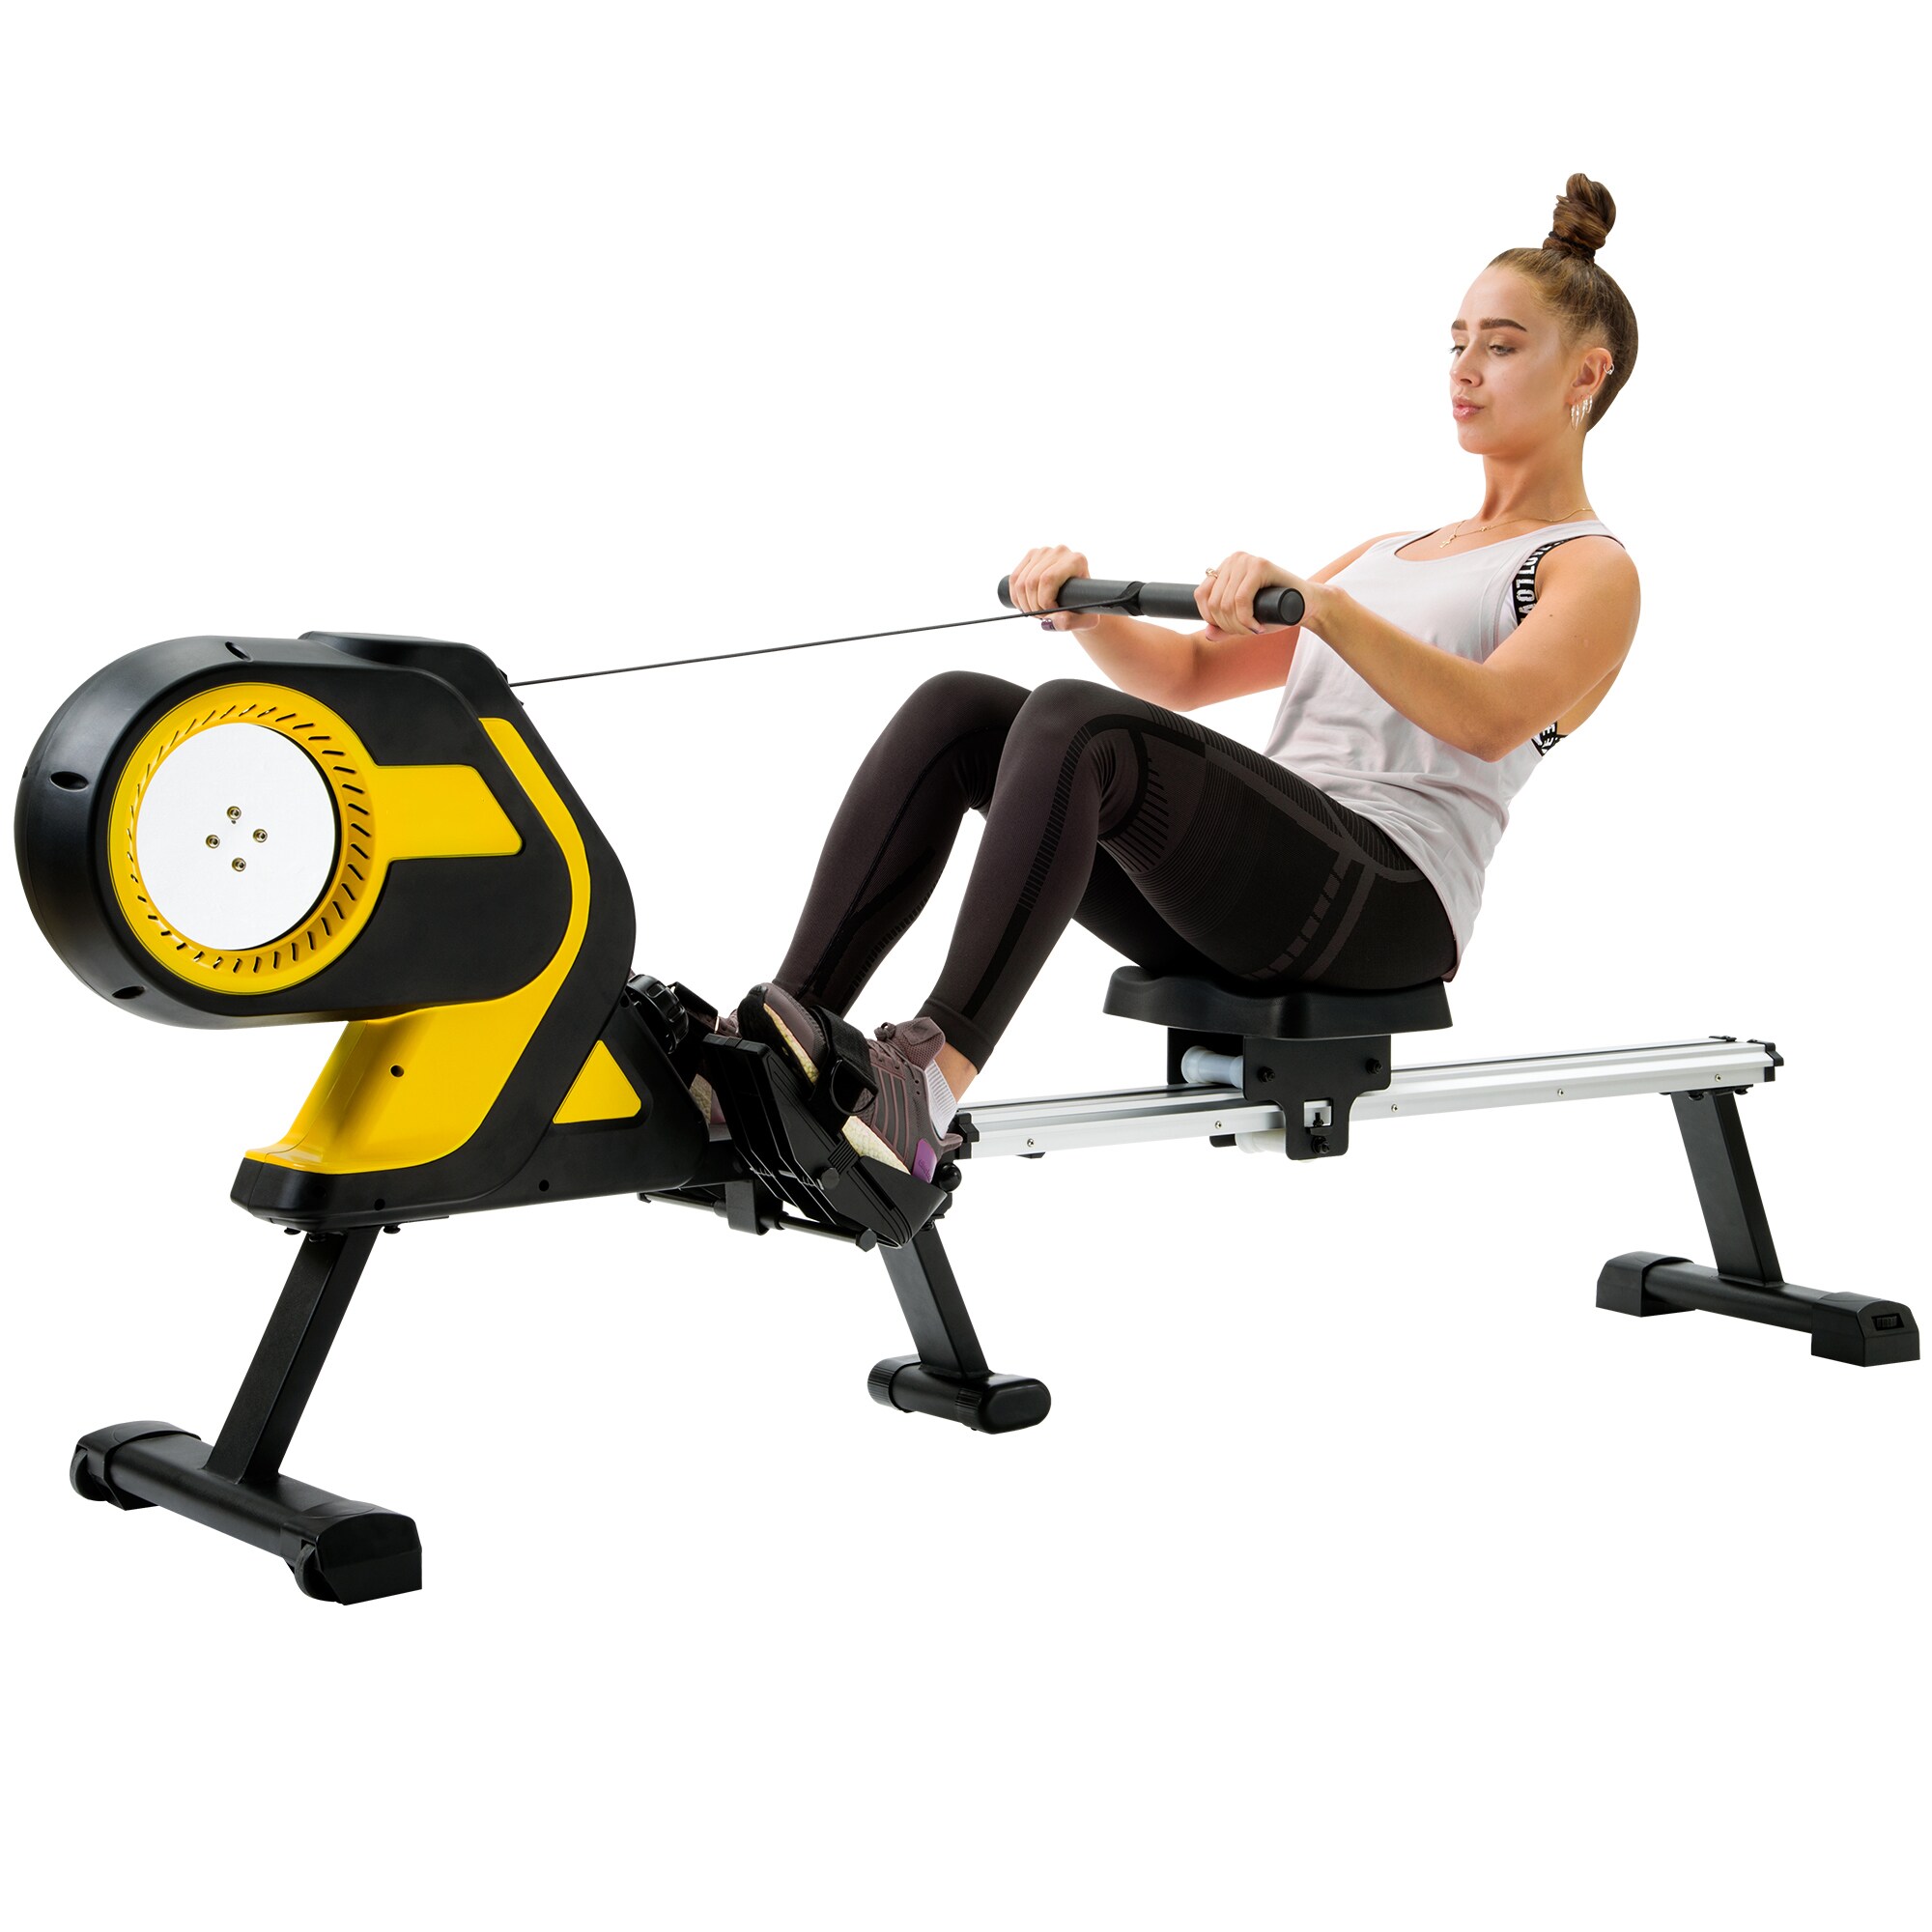 SNODE Magnetic Rower Rowing Machine Adjustable Resistance Smooth Quiet Home Workout Foldable Indoor Compact Exercise Equipment with Digital LCD Monitor Soft Seat 